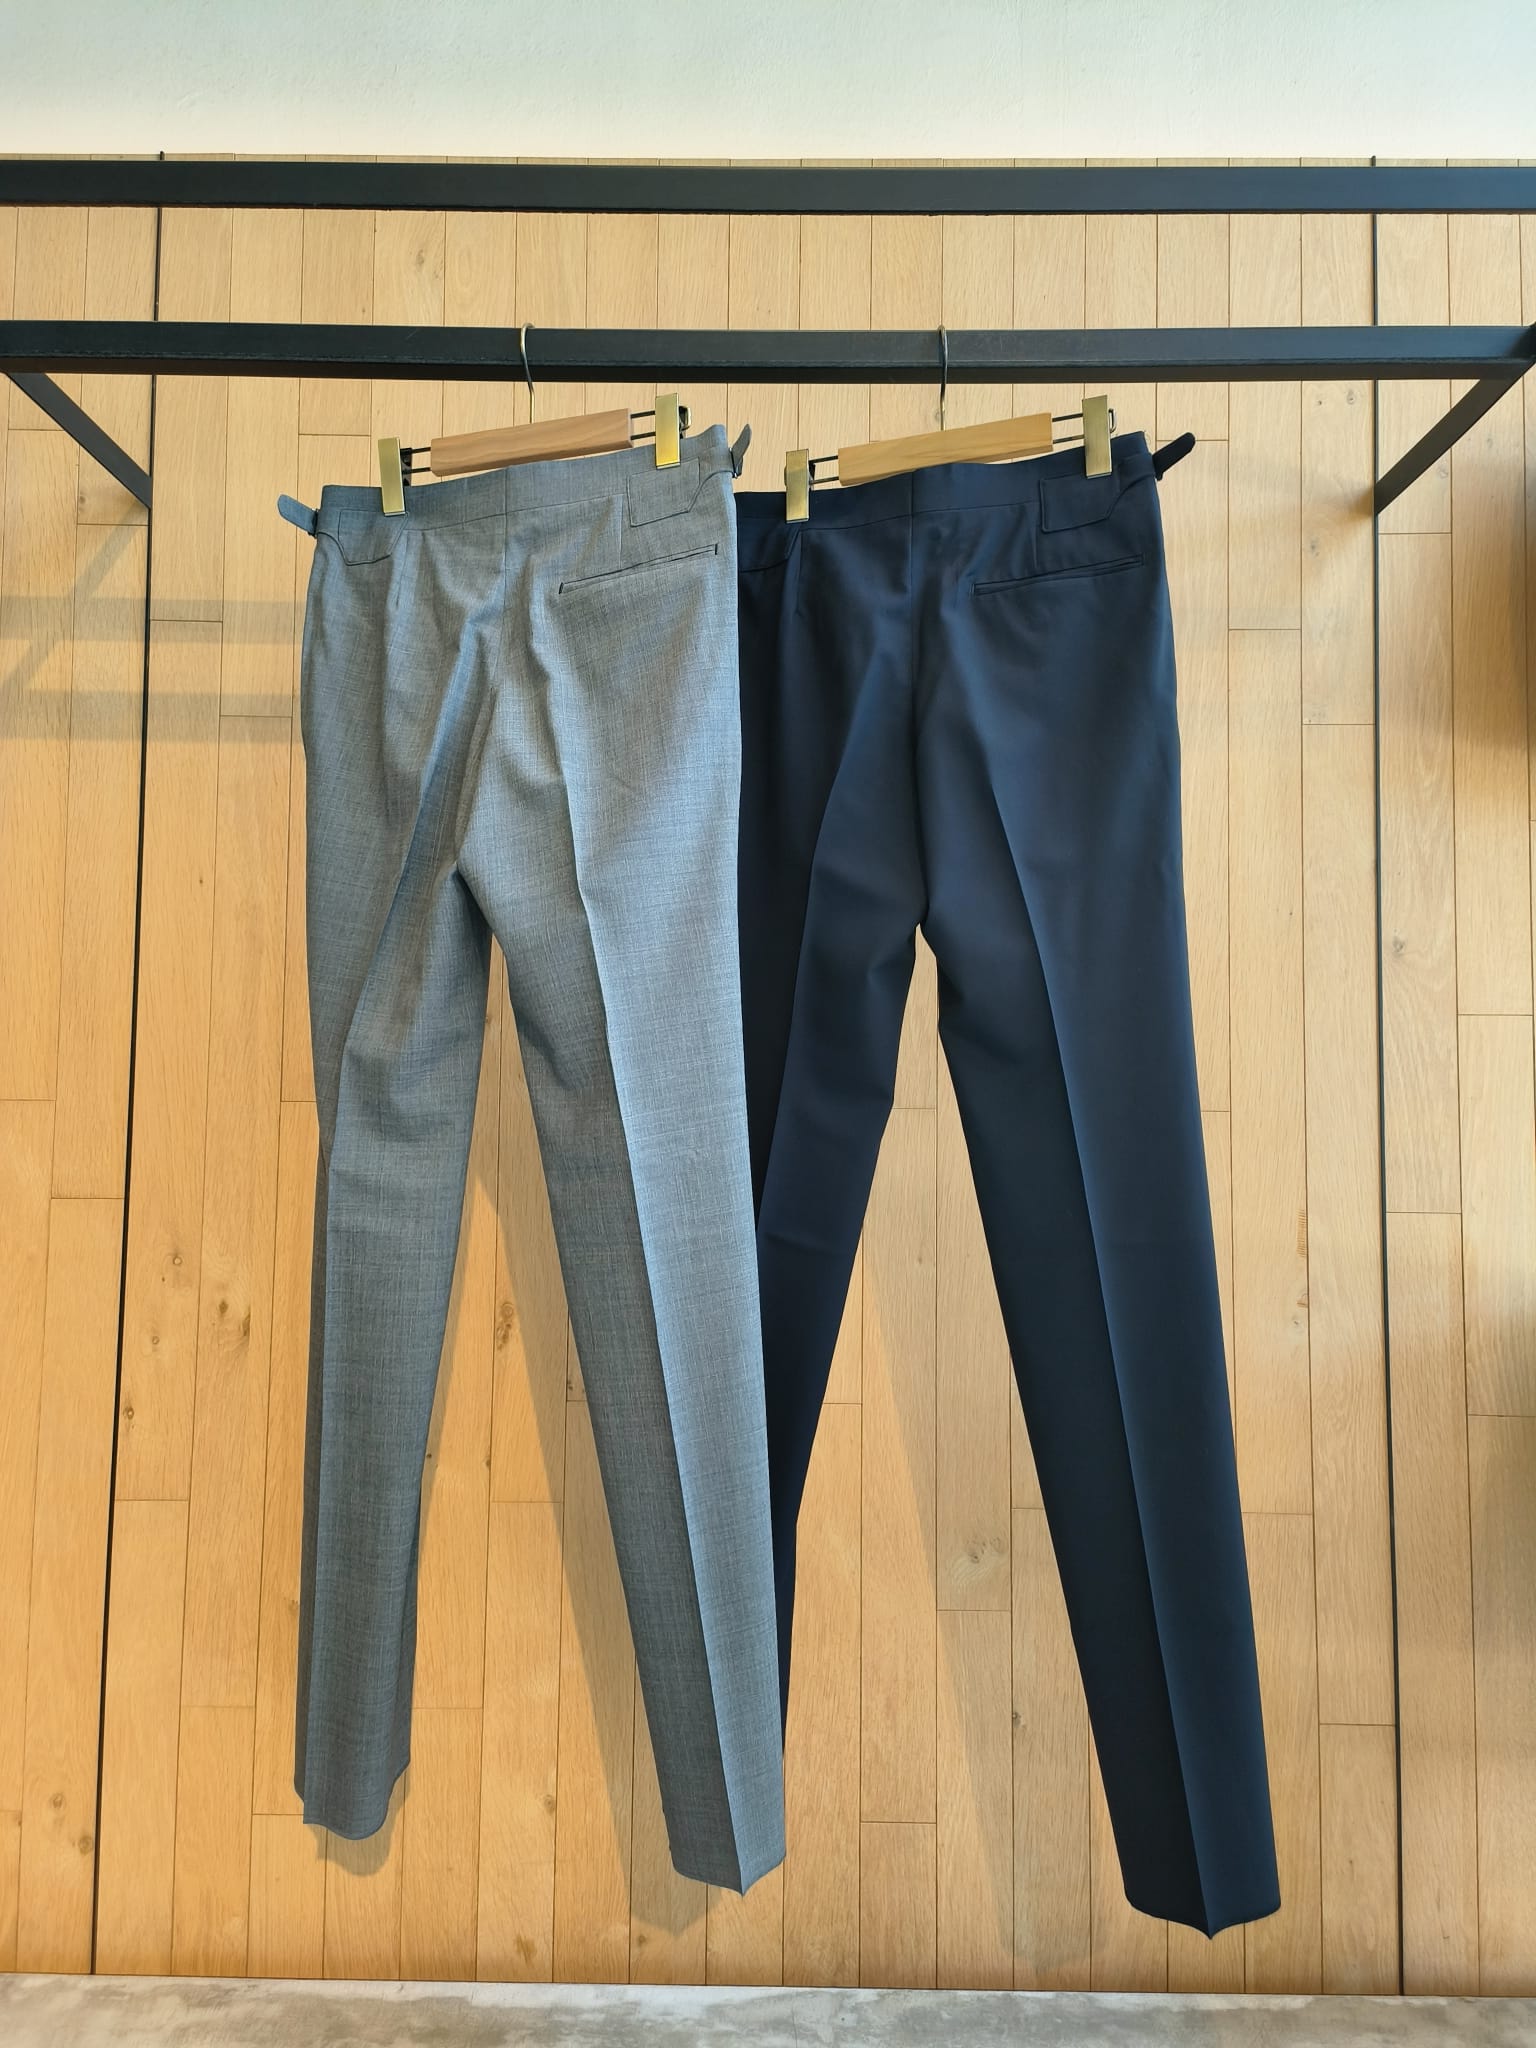 M1951 Korean Wool Field Pants are excellent quality military army surplus wool  pants from armysurpluswarehouse.com